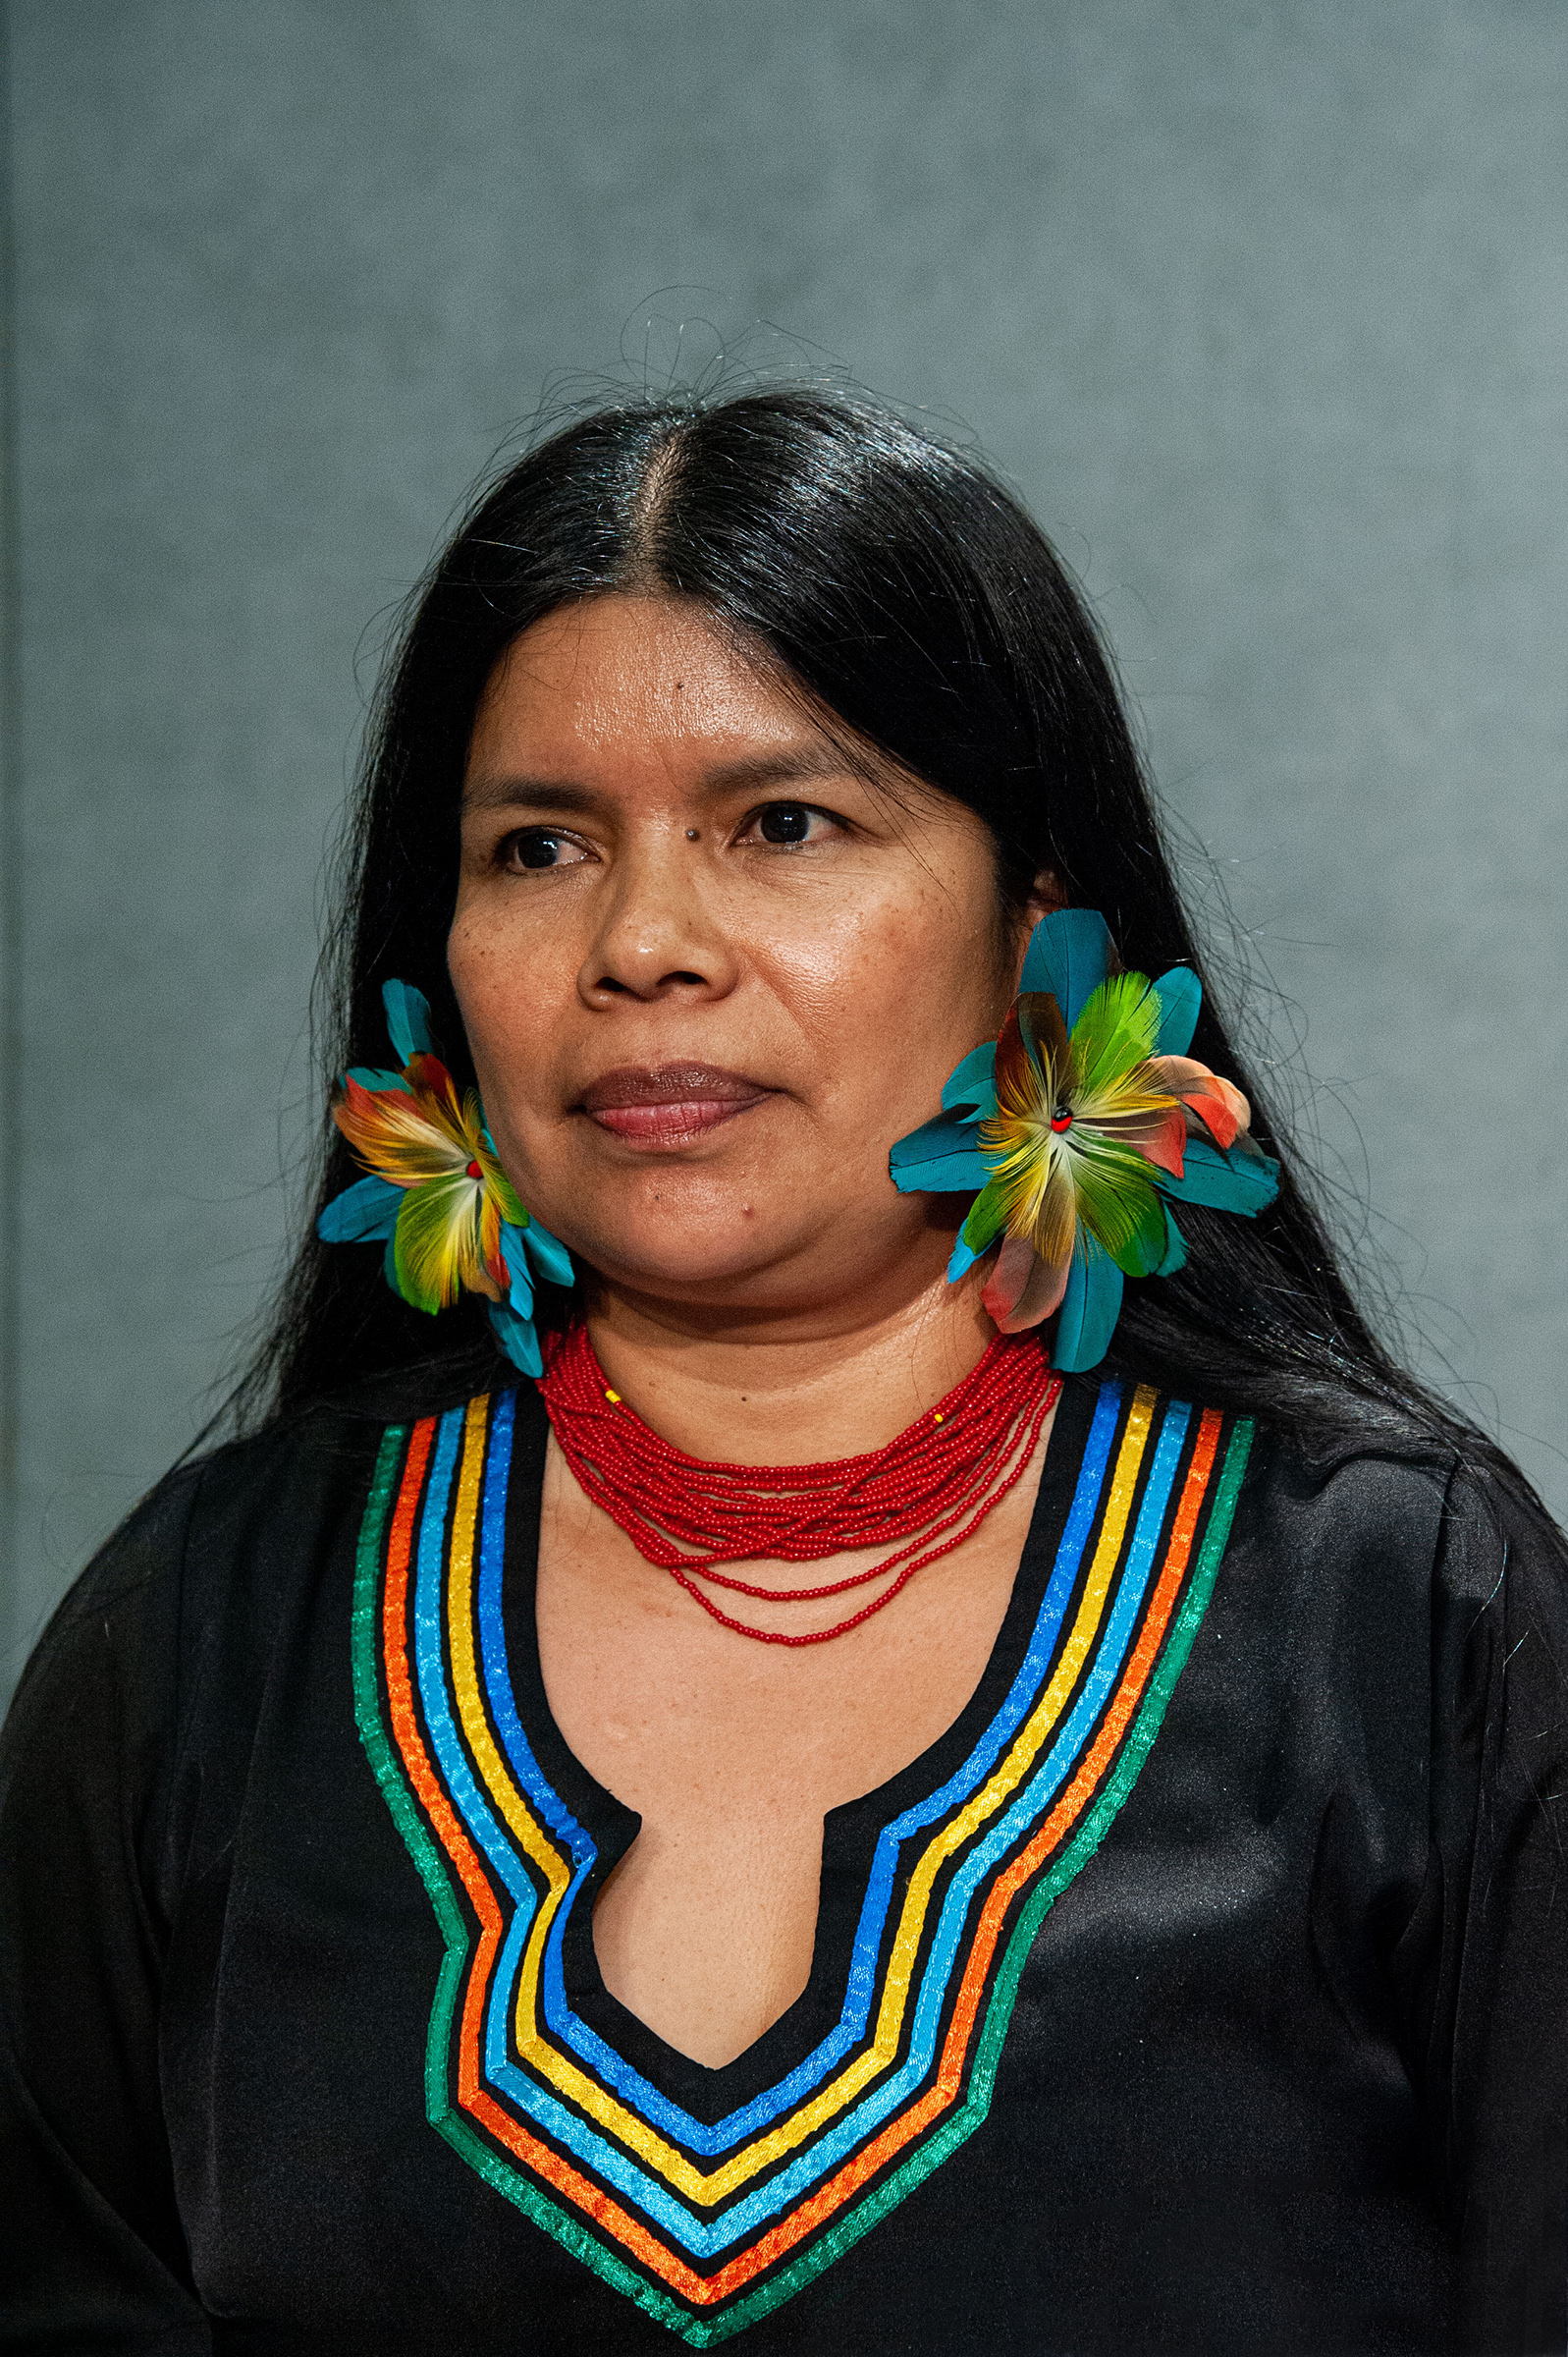 Patricia Gualinga, Indigenous Leader in the Defense of Human Rights of the Kichwa Communities of Sarayaku (Ecuador) speaks at the Press Office of the Holy See in the Vatican on Oct 17, 2019. (PA Images/Sipa USA)